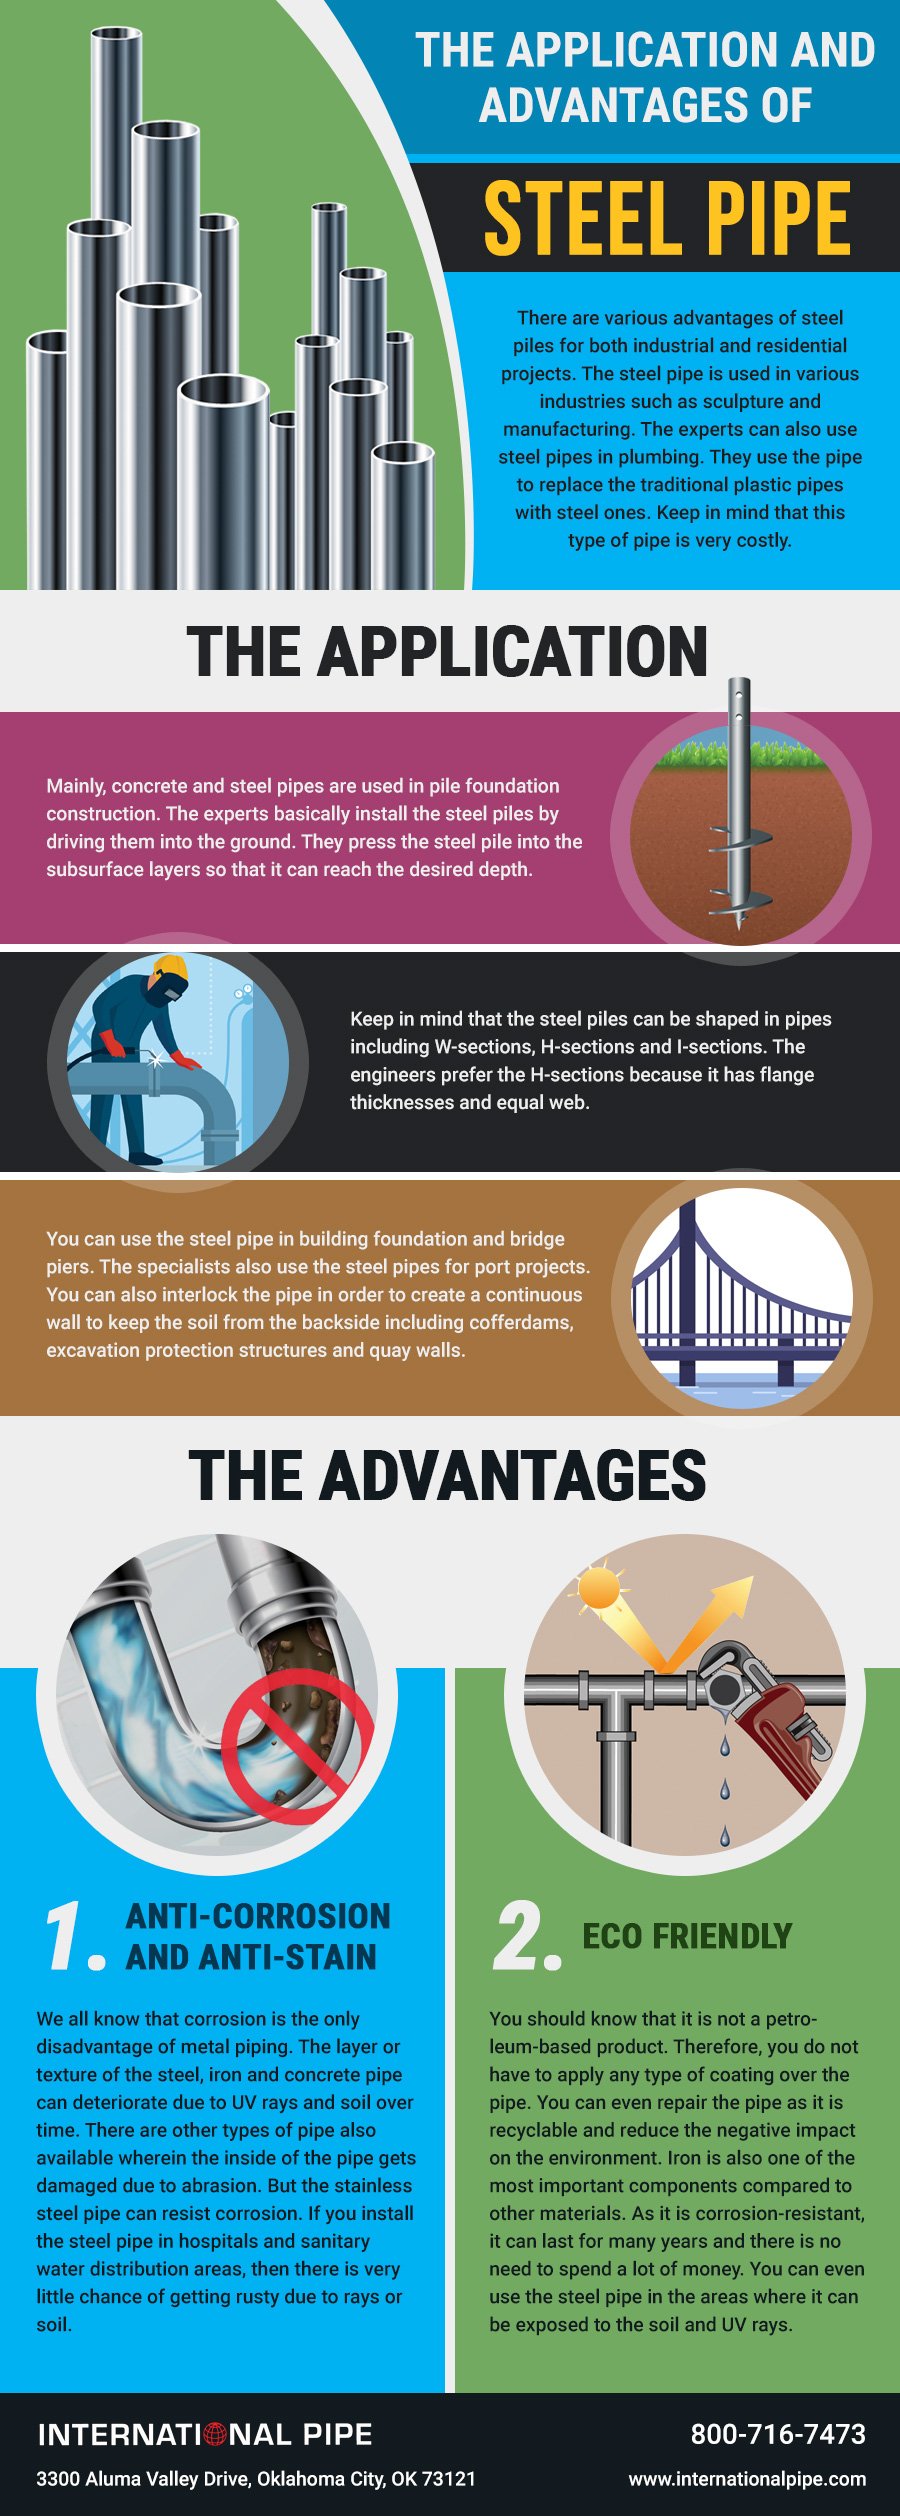 The Applications and Advantages Of Steel Pipe